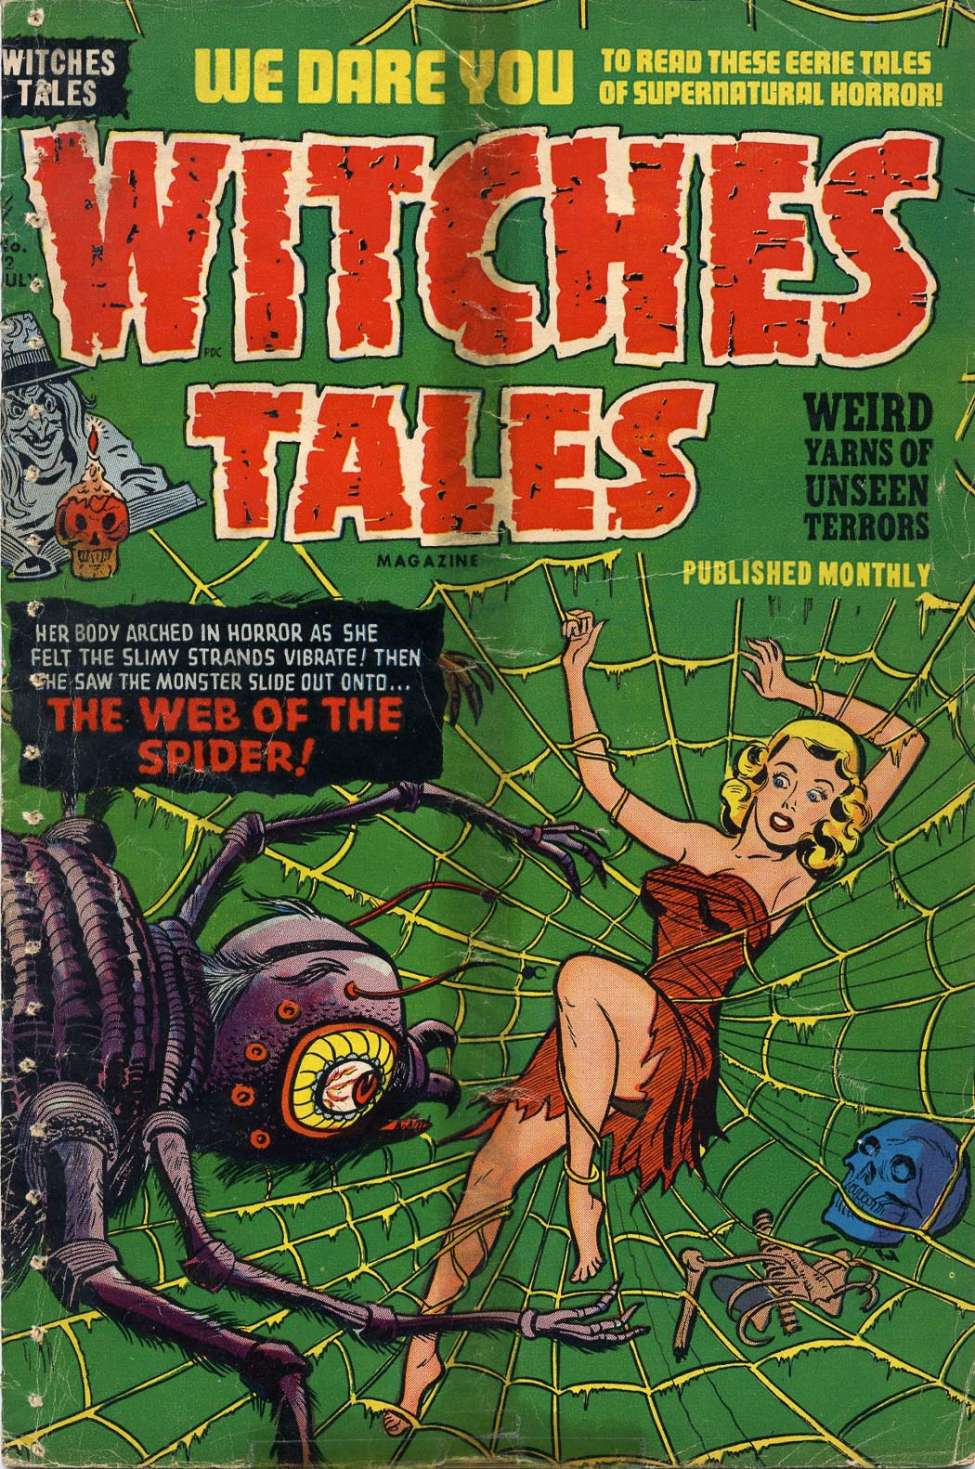 Comic Book Cover For Witches Tales 12